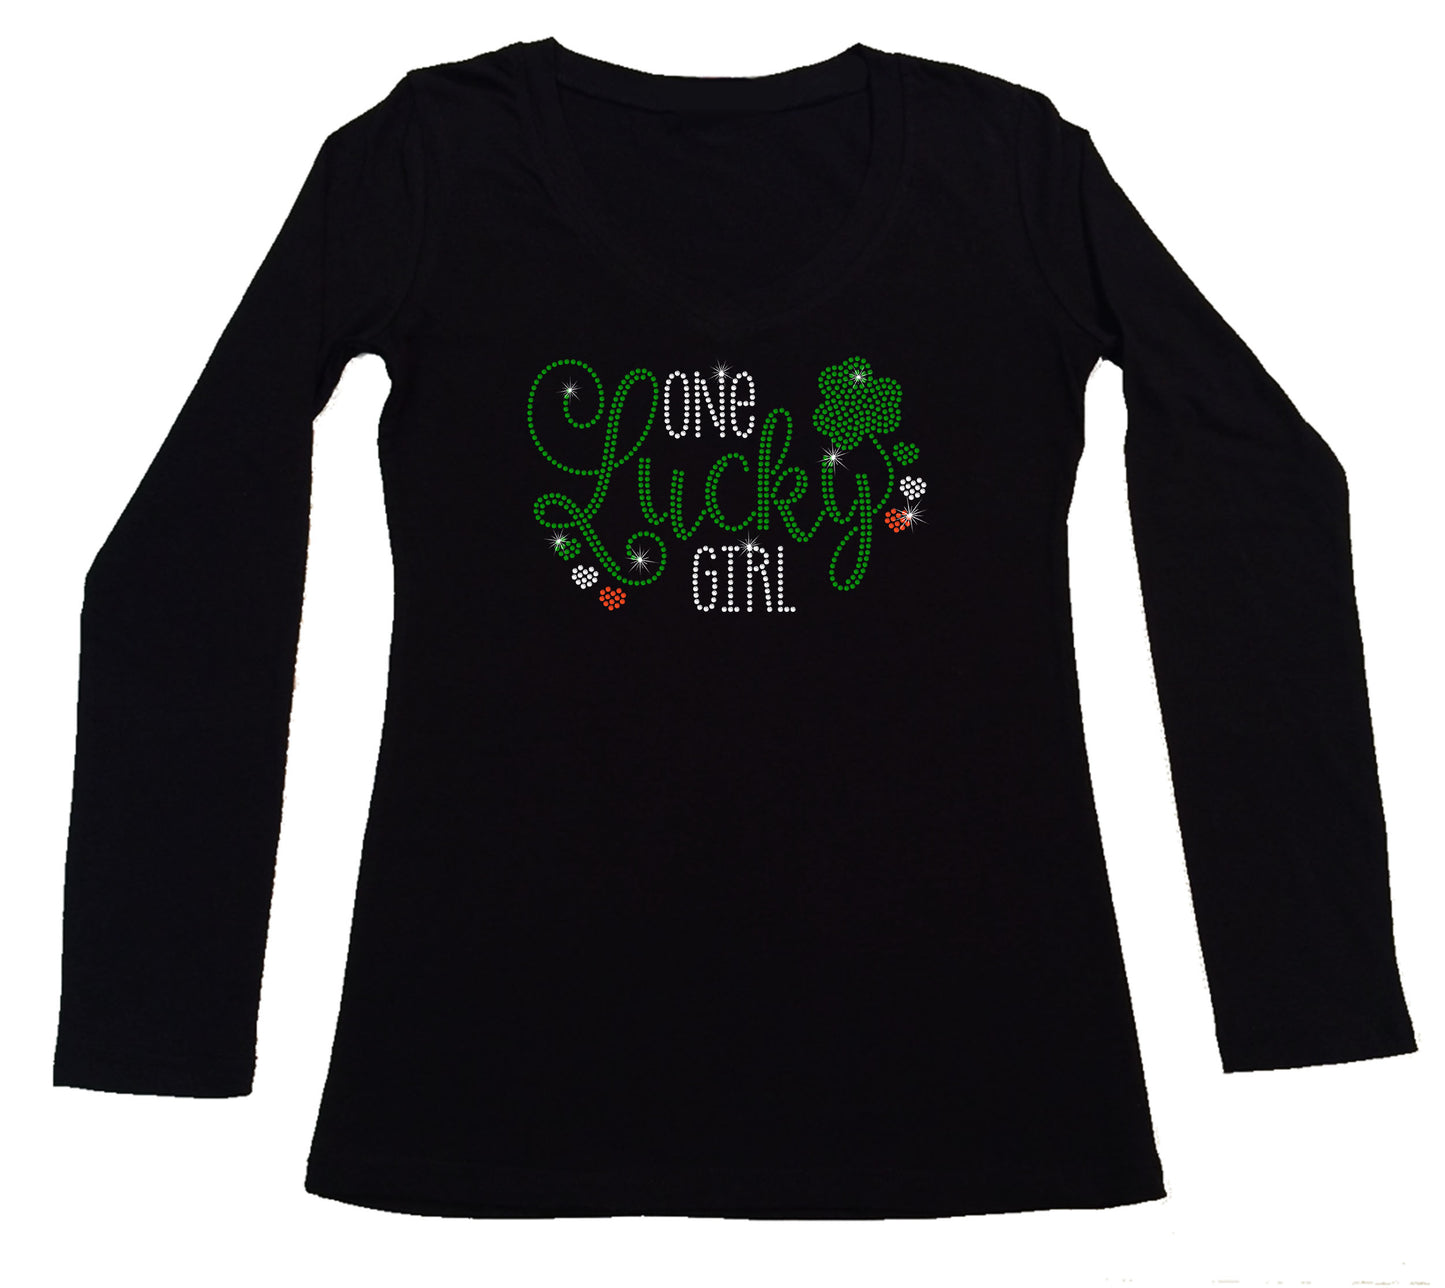 Women's Rhinestone Fitted Tight Snug Shirt One Lucky Girl with Clover - St. Patrick's Day Shirt